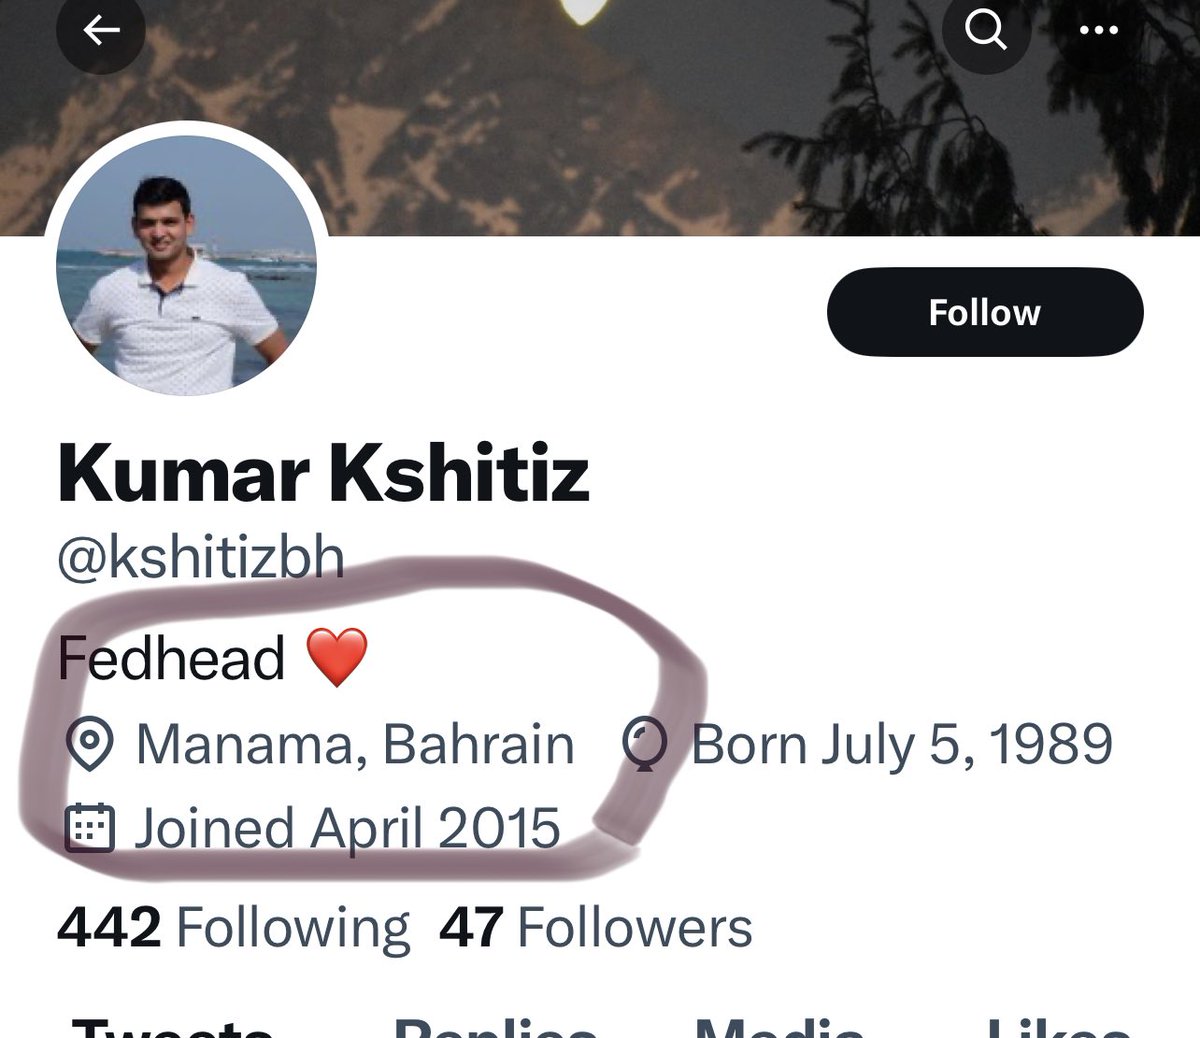 RT @rupamurthy1: @kshitizbh Good to know Bahrain has moved to India. https://t.co/Qq8QTZxmgP